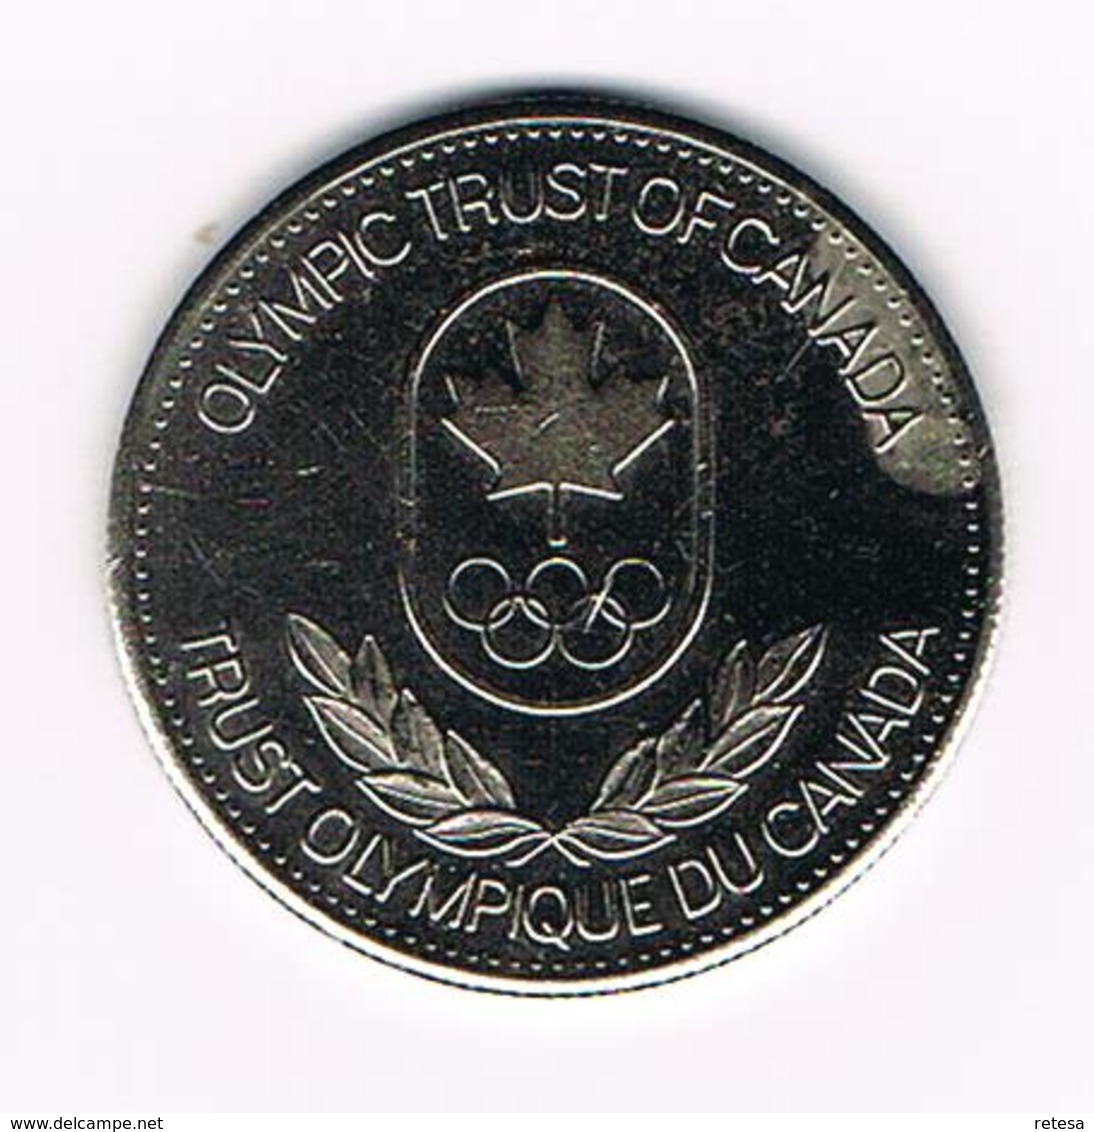 &  PENNING OLYMPIC TRUST OF CANADA  YACHTING 1980 - Souvenirmunten (elongated Coins)